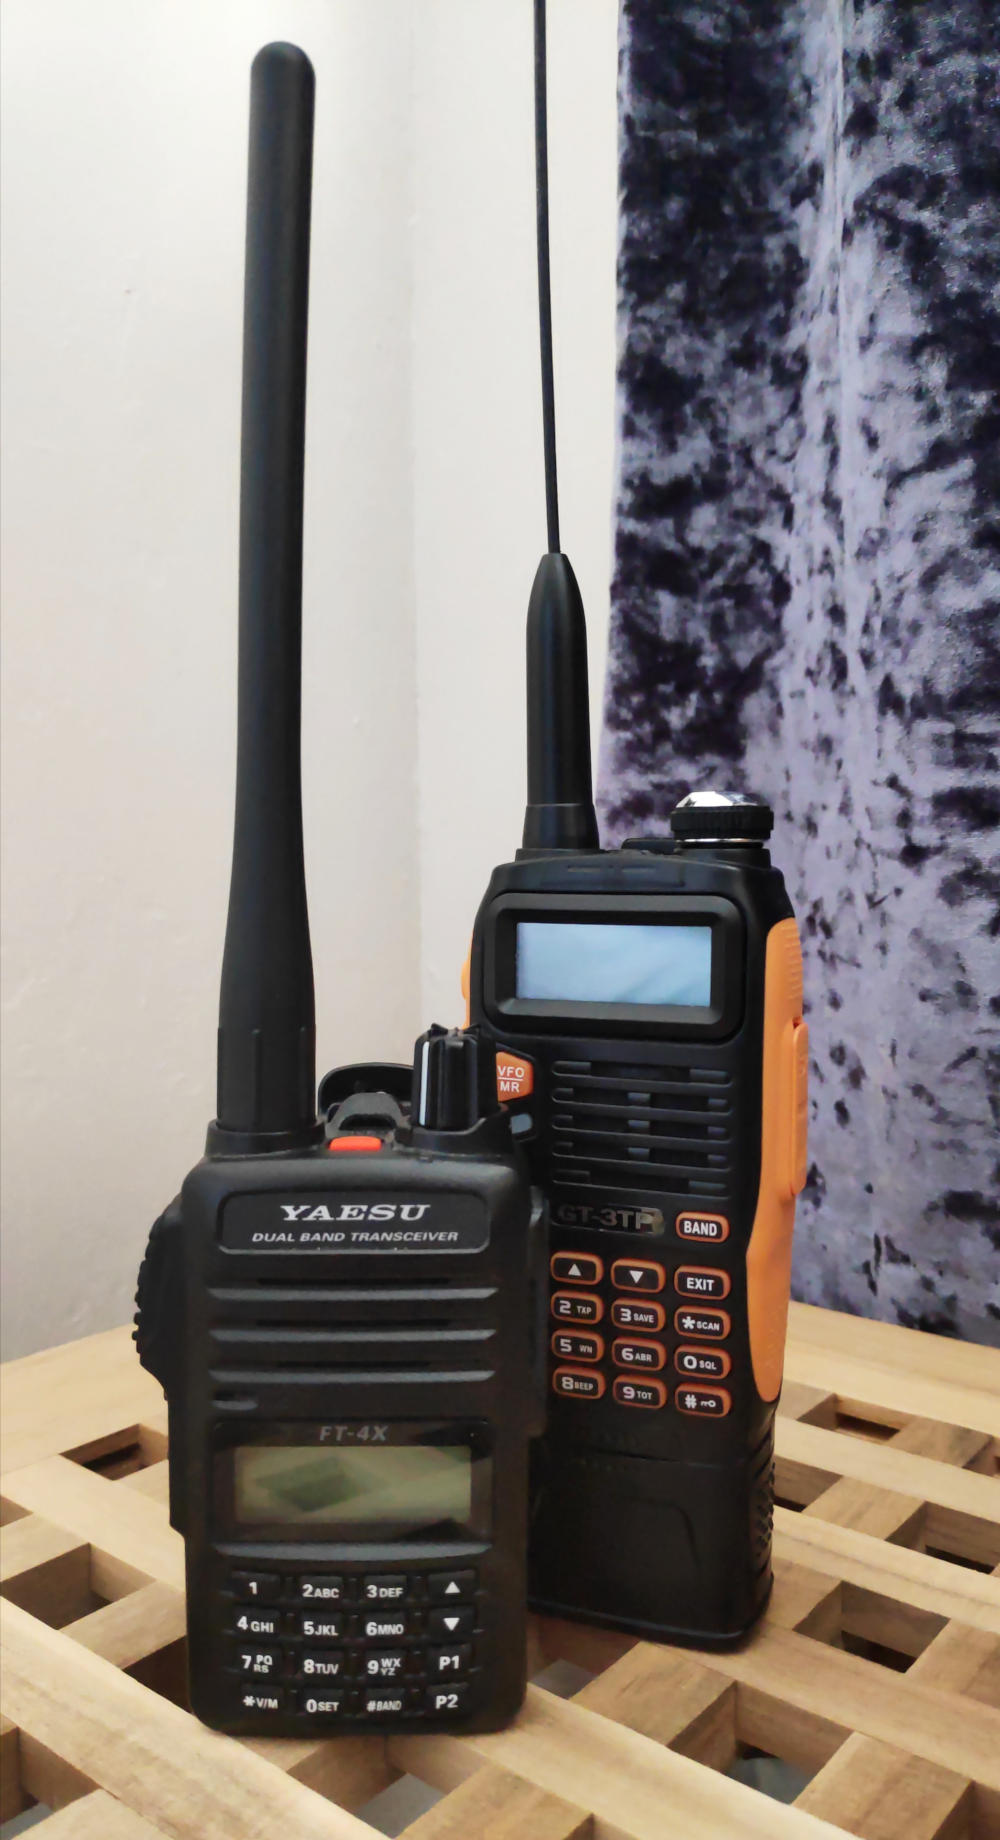 A picture of a Yaesu FT-4X and a Boafeng GT-3TP